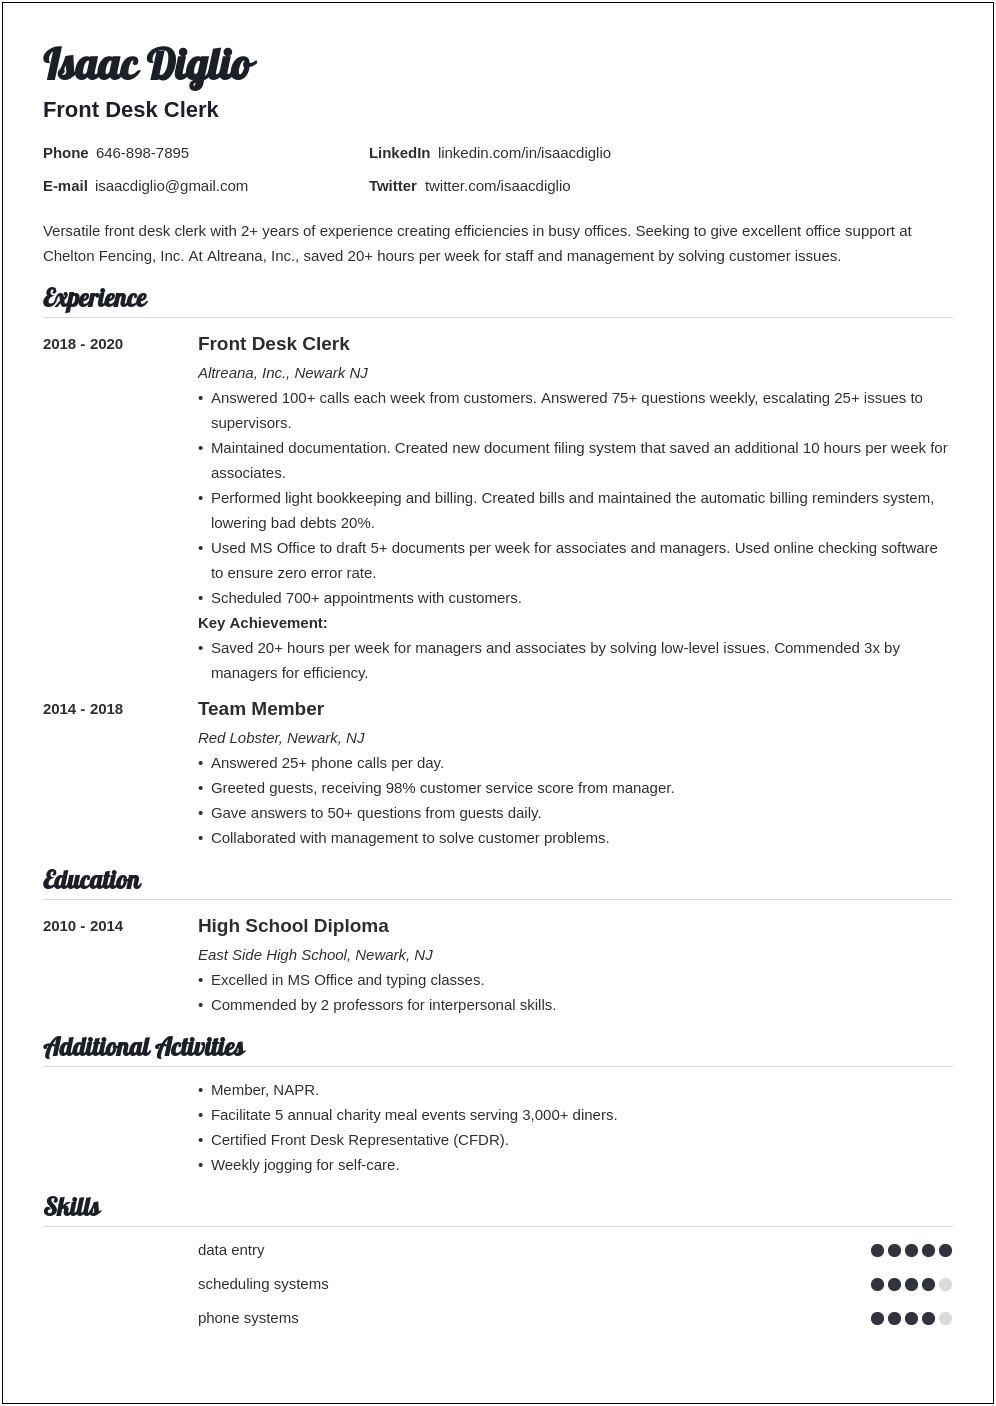 Front Desk Agent Skills And Abilities Resume